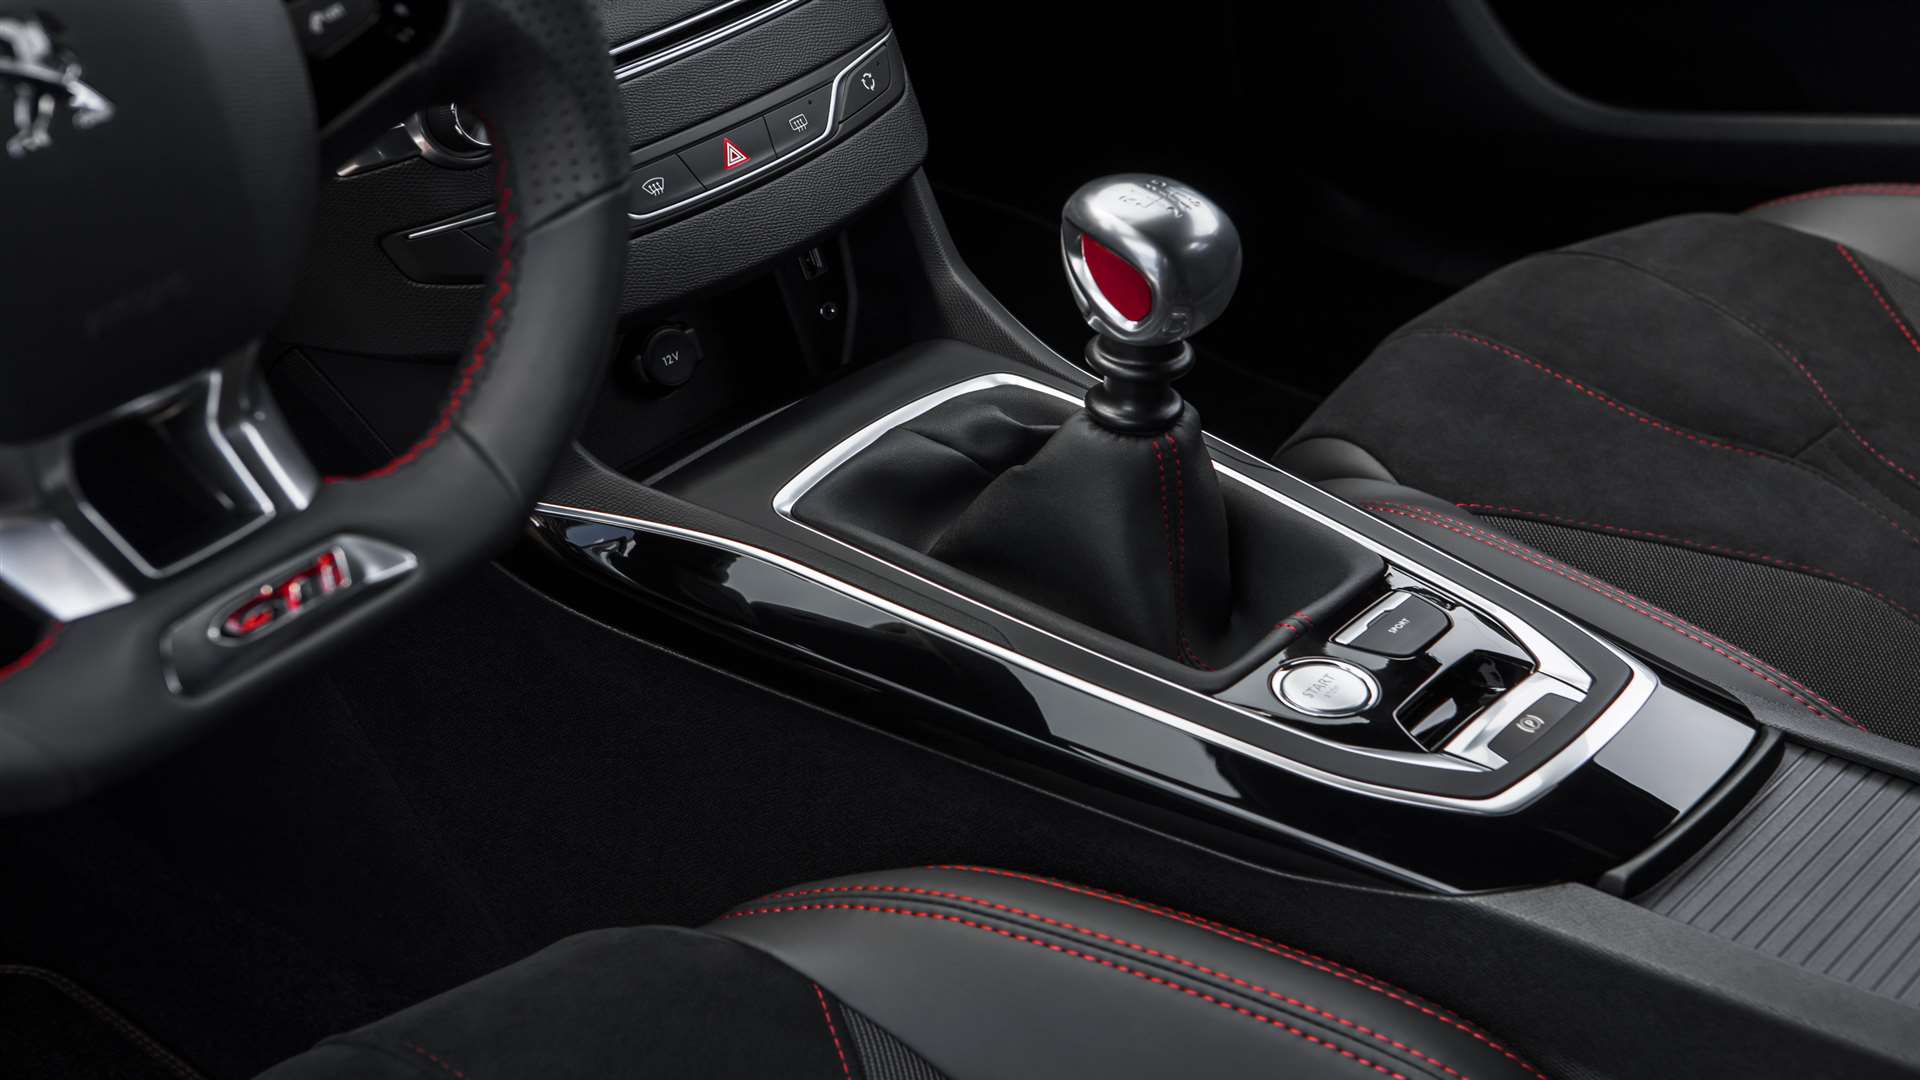 The six-speed box is slick and positive